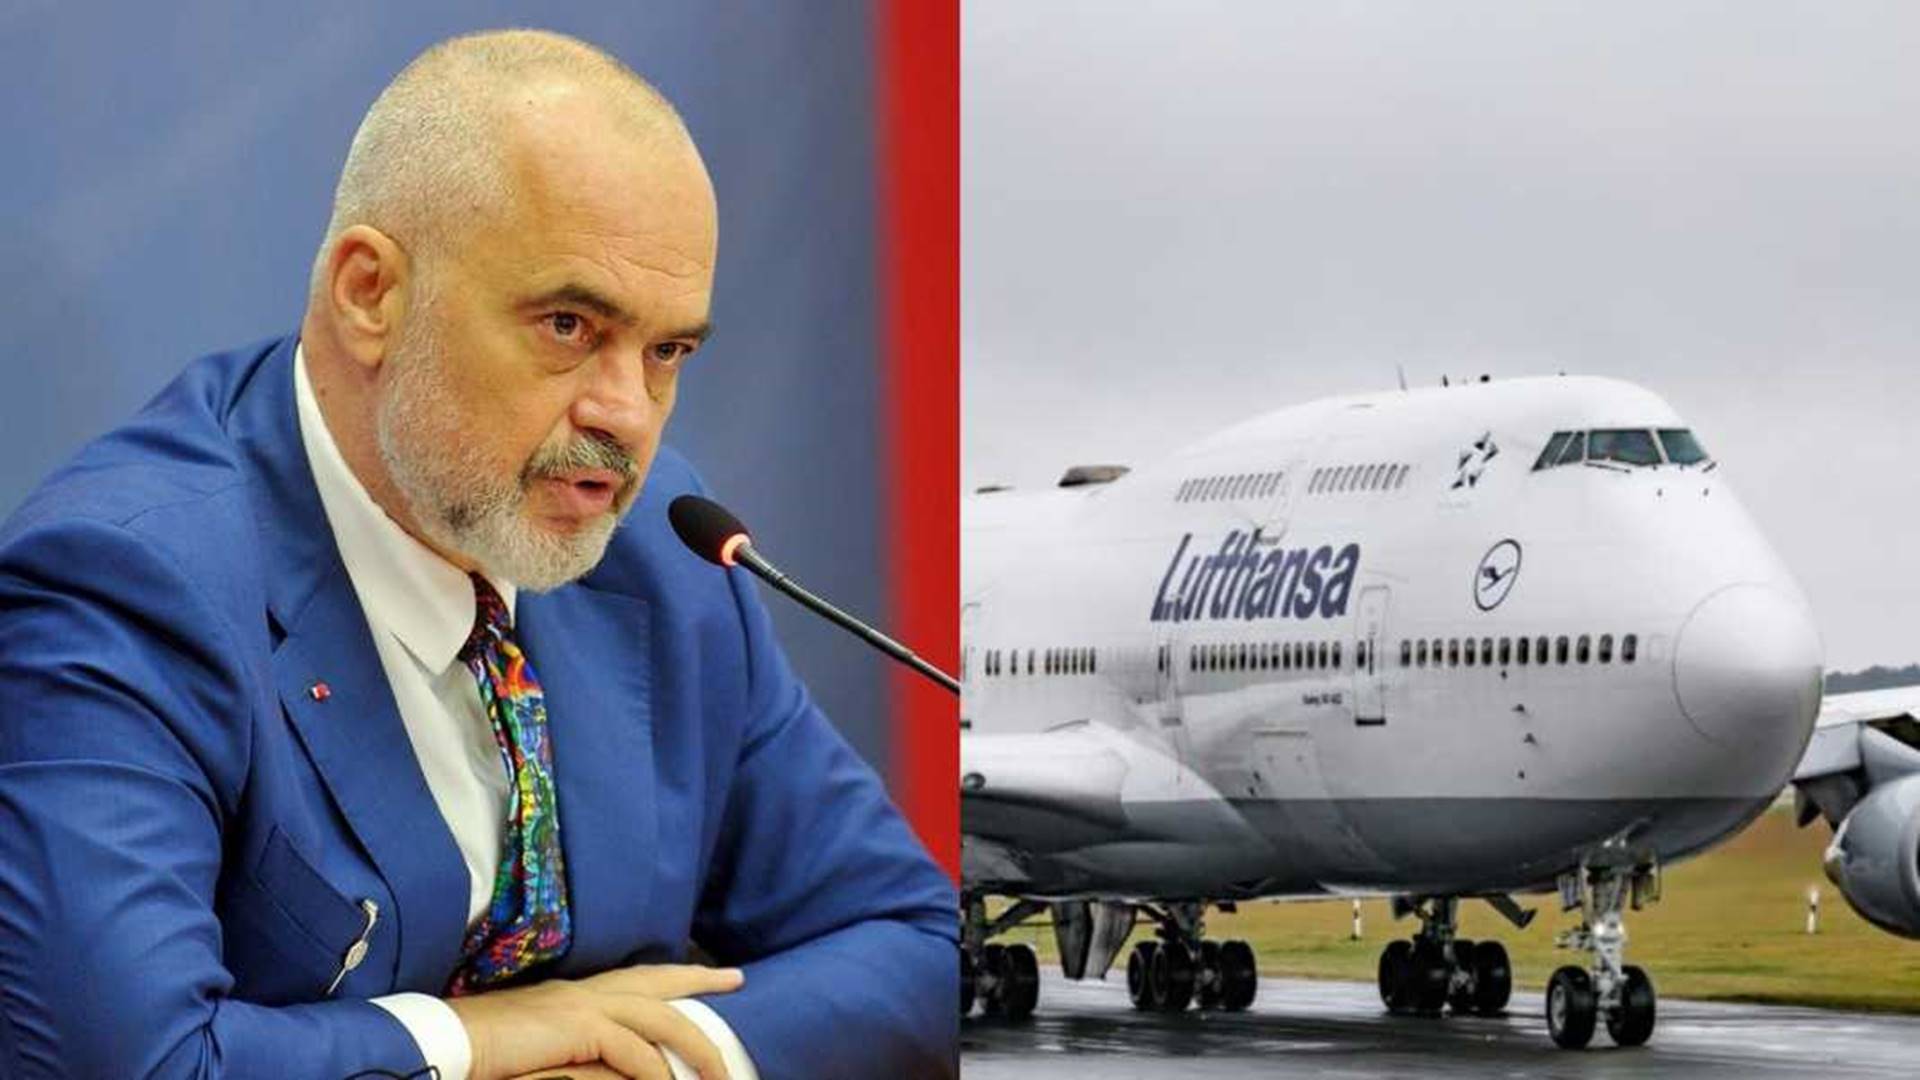 'No preferential treatments'; how Edi Rama was expelled from Lufthansa flight to the USA